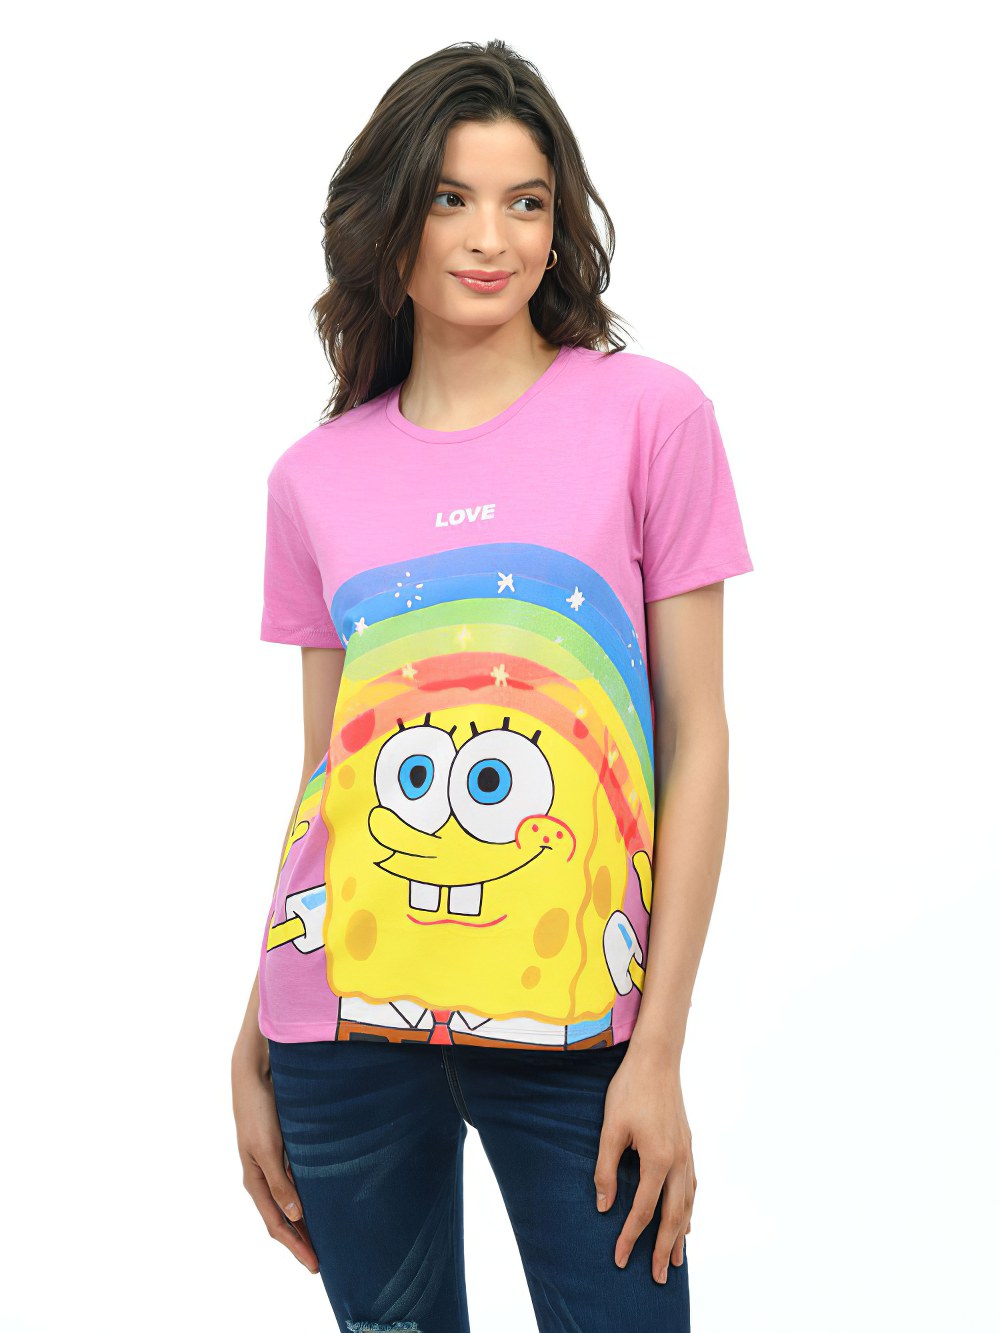 Gangster Spongebob With Rainbow Size Up To 5xl